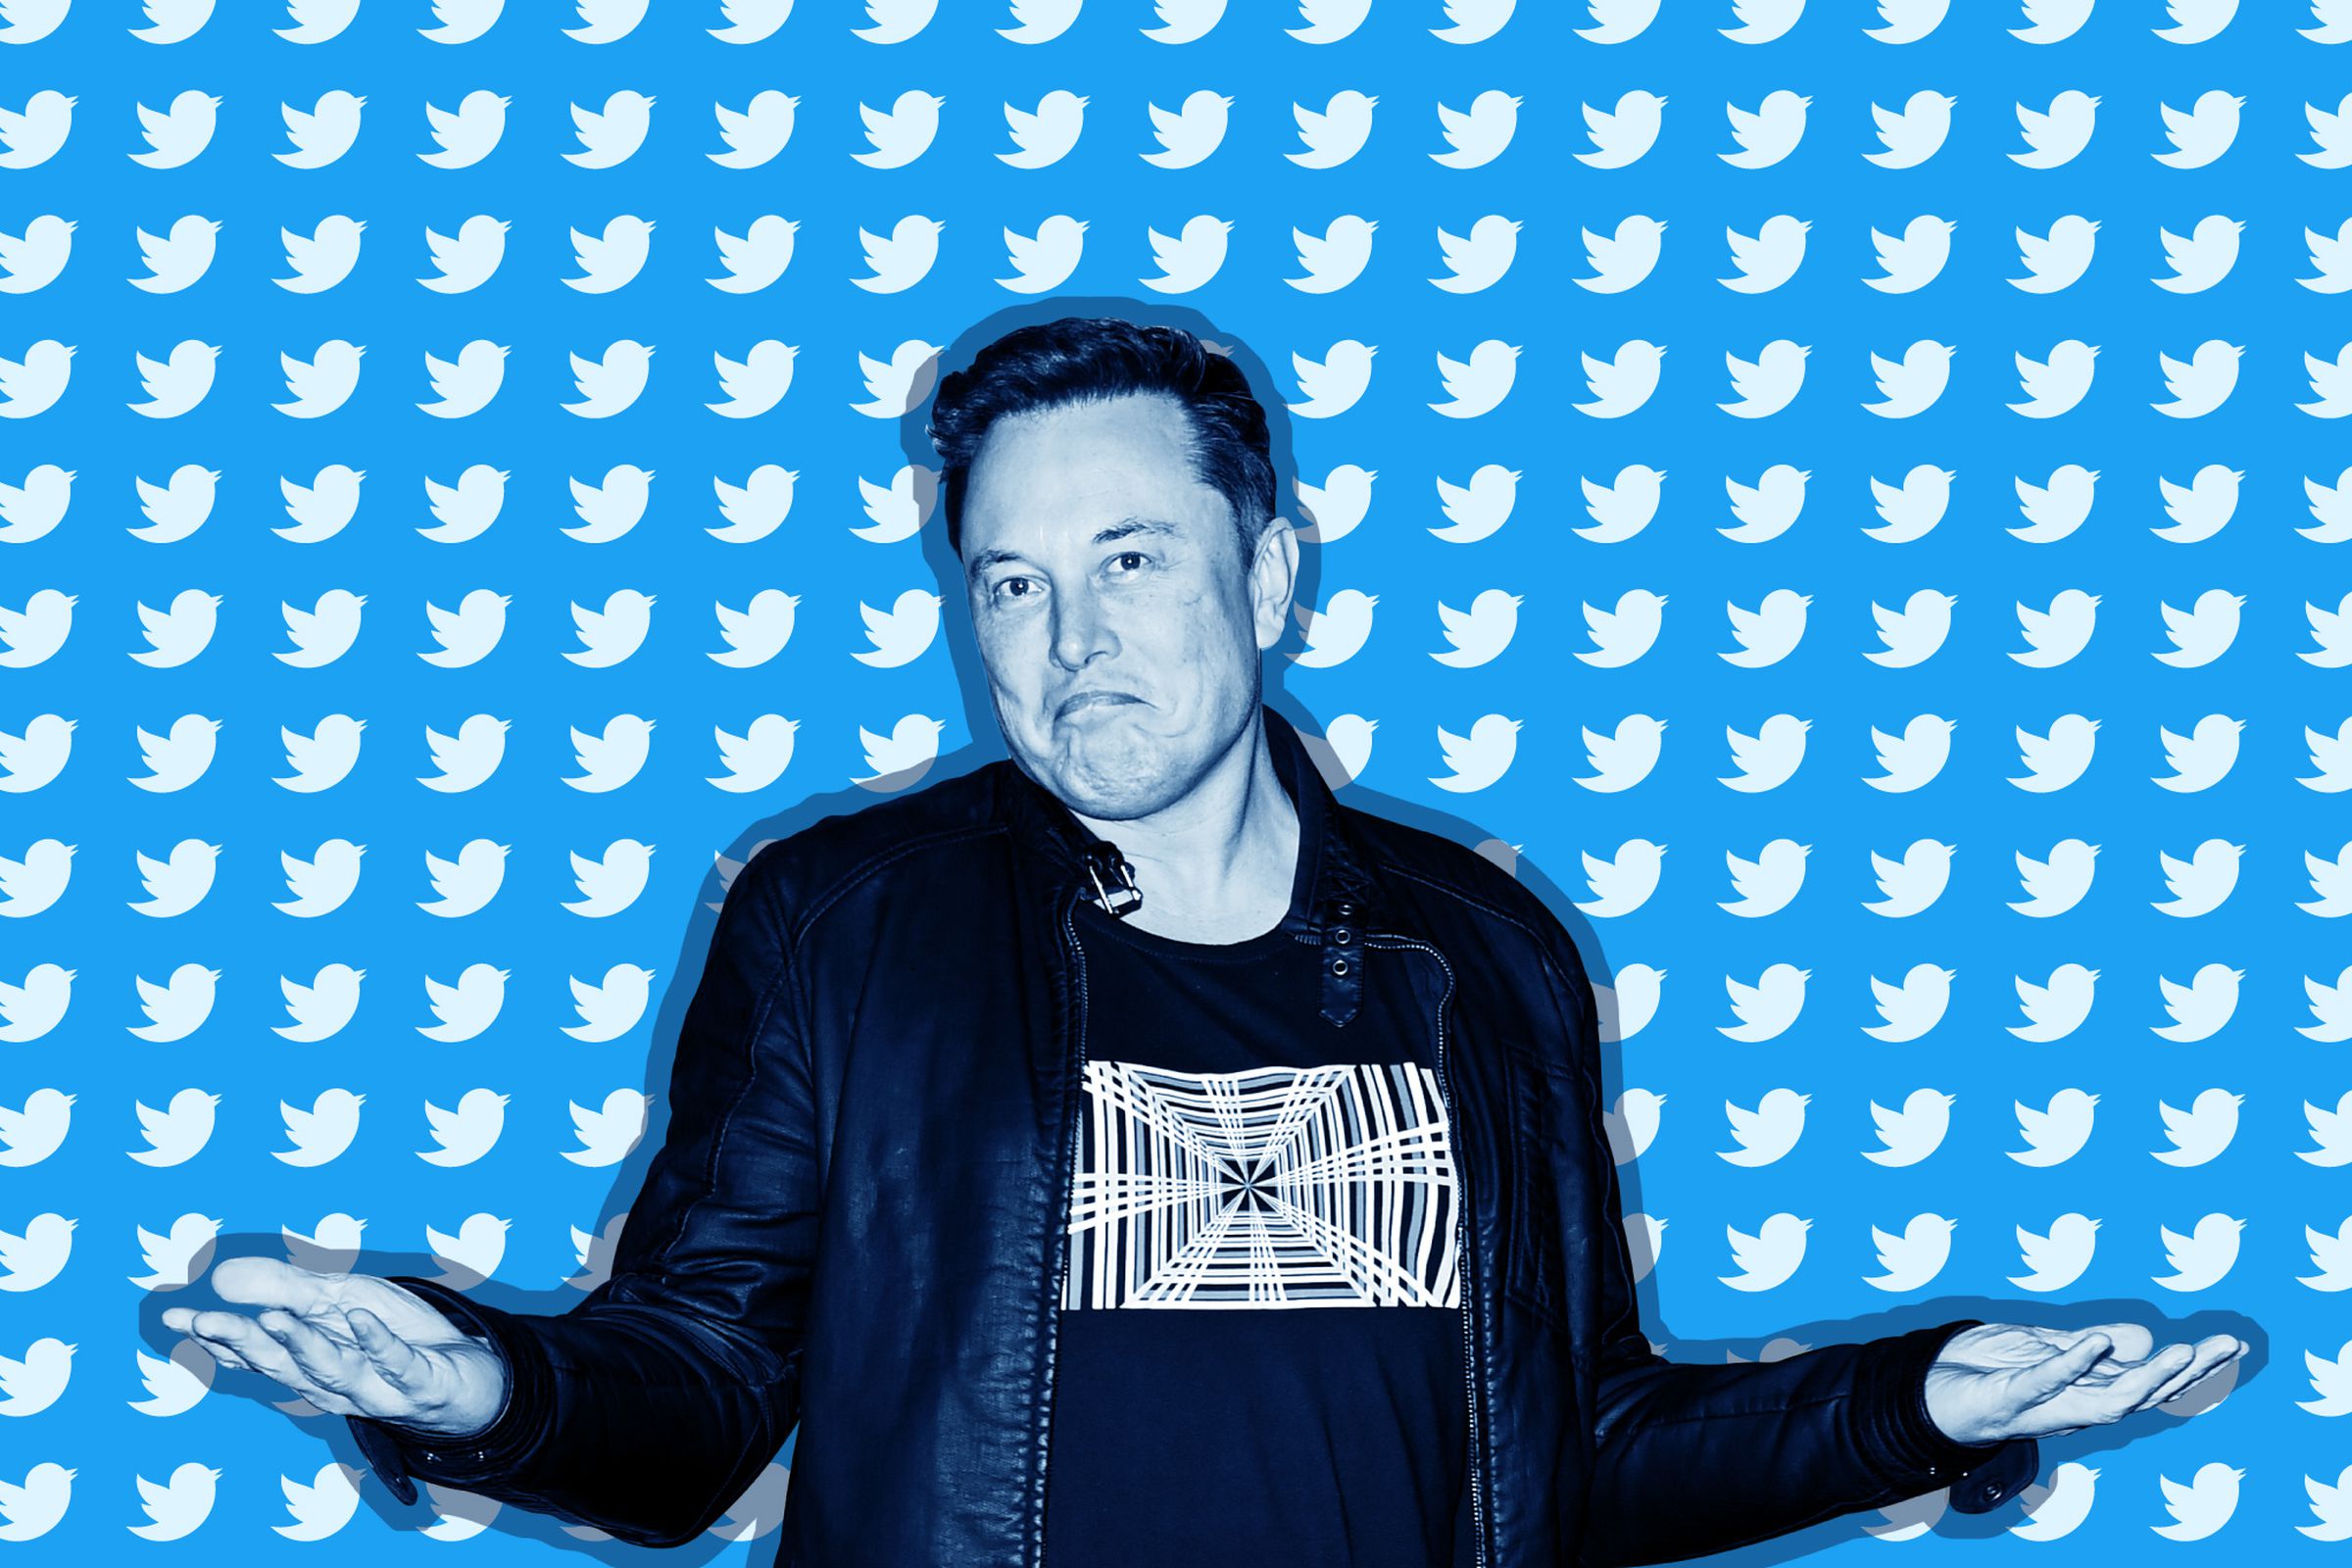 Who should be the next CEO of Twitter?